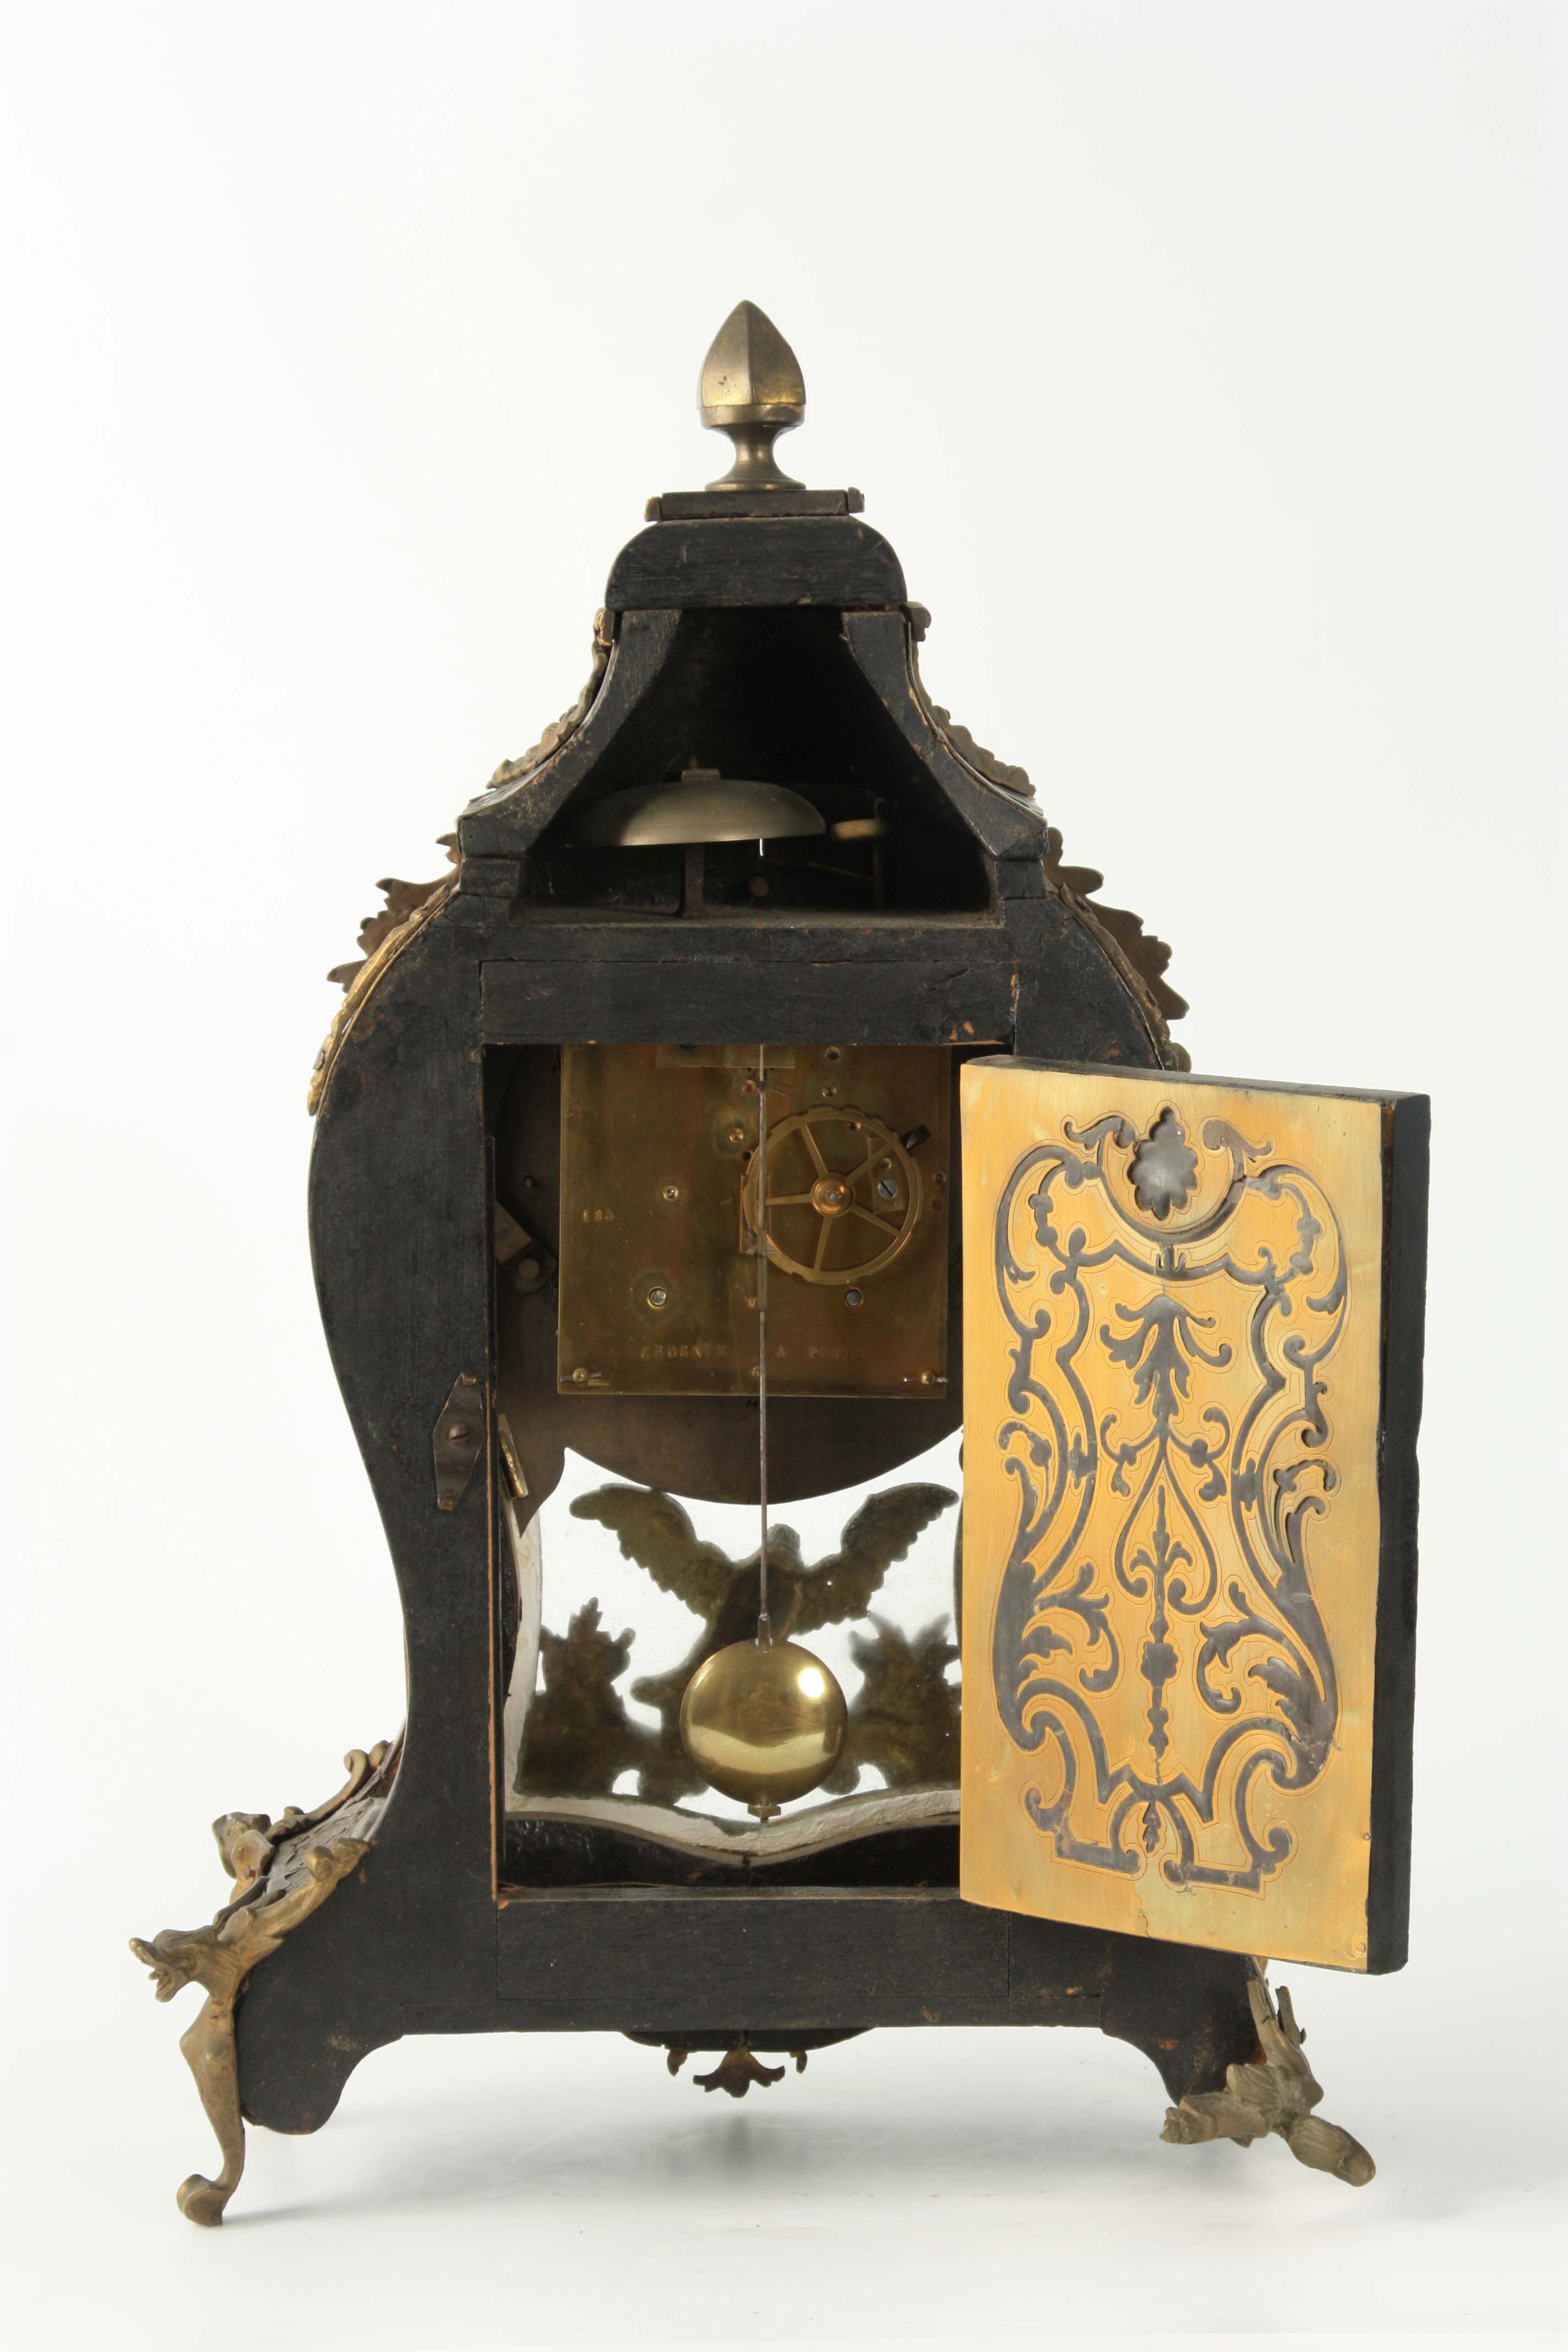 GROGNIE, A PARIS. AN EARLY 19TH CENTURY FRENCH CONTRA BOULLE MANTEL CLOCK the balloon-shaped case - Image 6 of 7